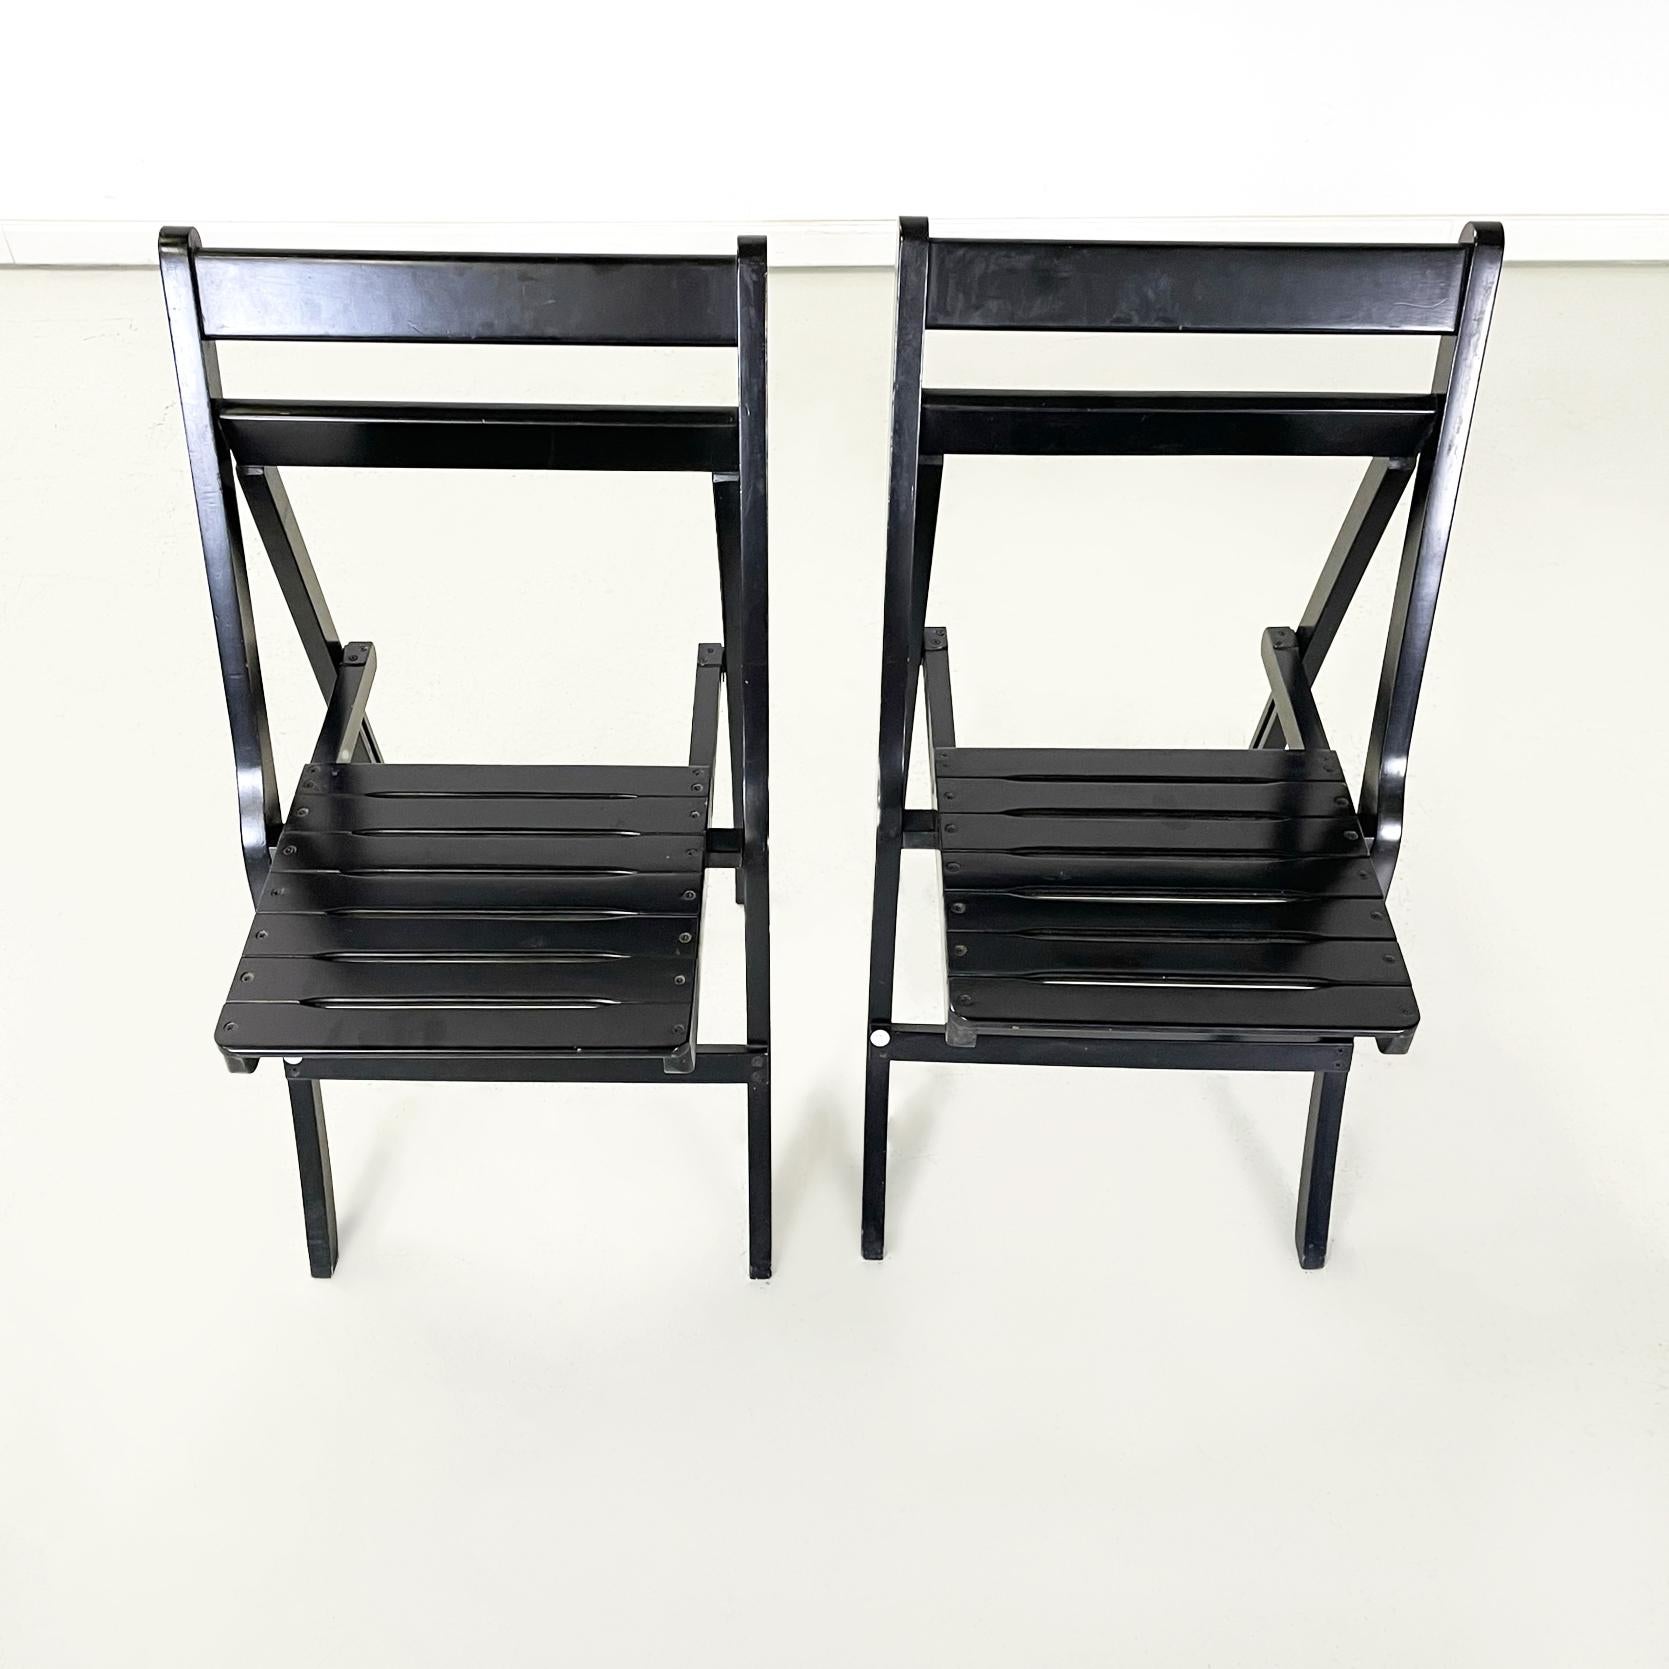 Italian modern Wood folding chairs Morettina by Ettore Moretti for Zanotta, 1970s
Folding chairs mod. Morettina in black painted wood. The backrest and seat is made up of a series of slats.
Produced by Zanotta in 1970s and designed by Ettore